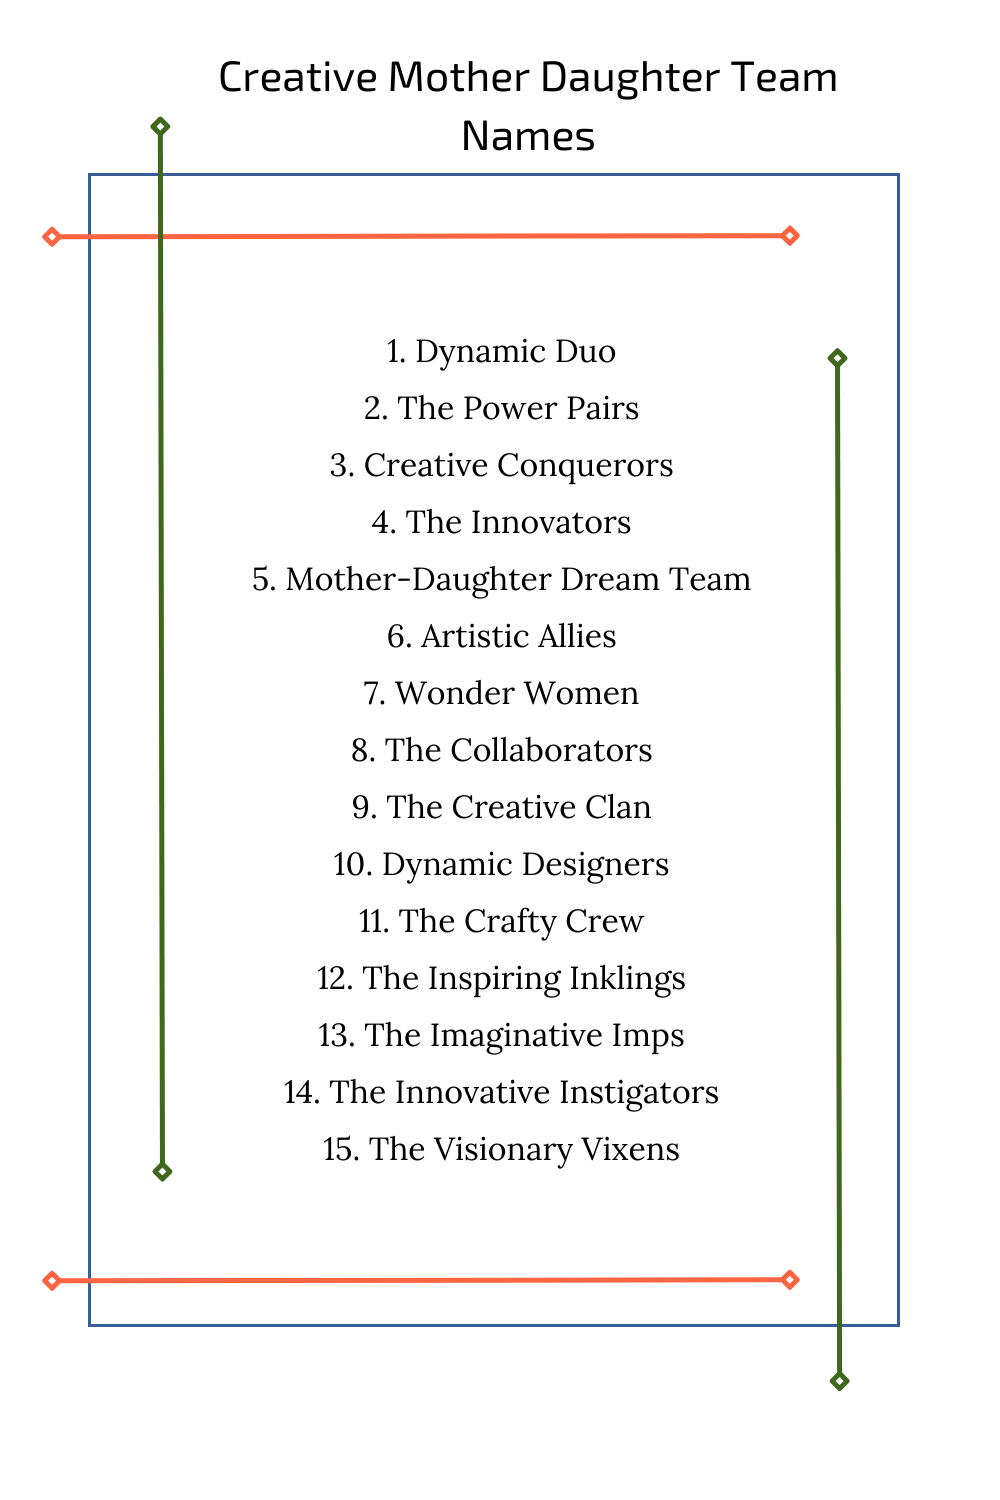 Creative Mother Daughter Team Names